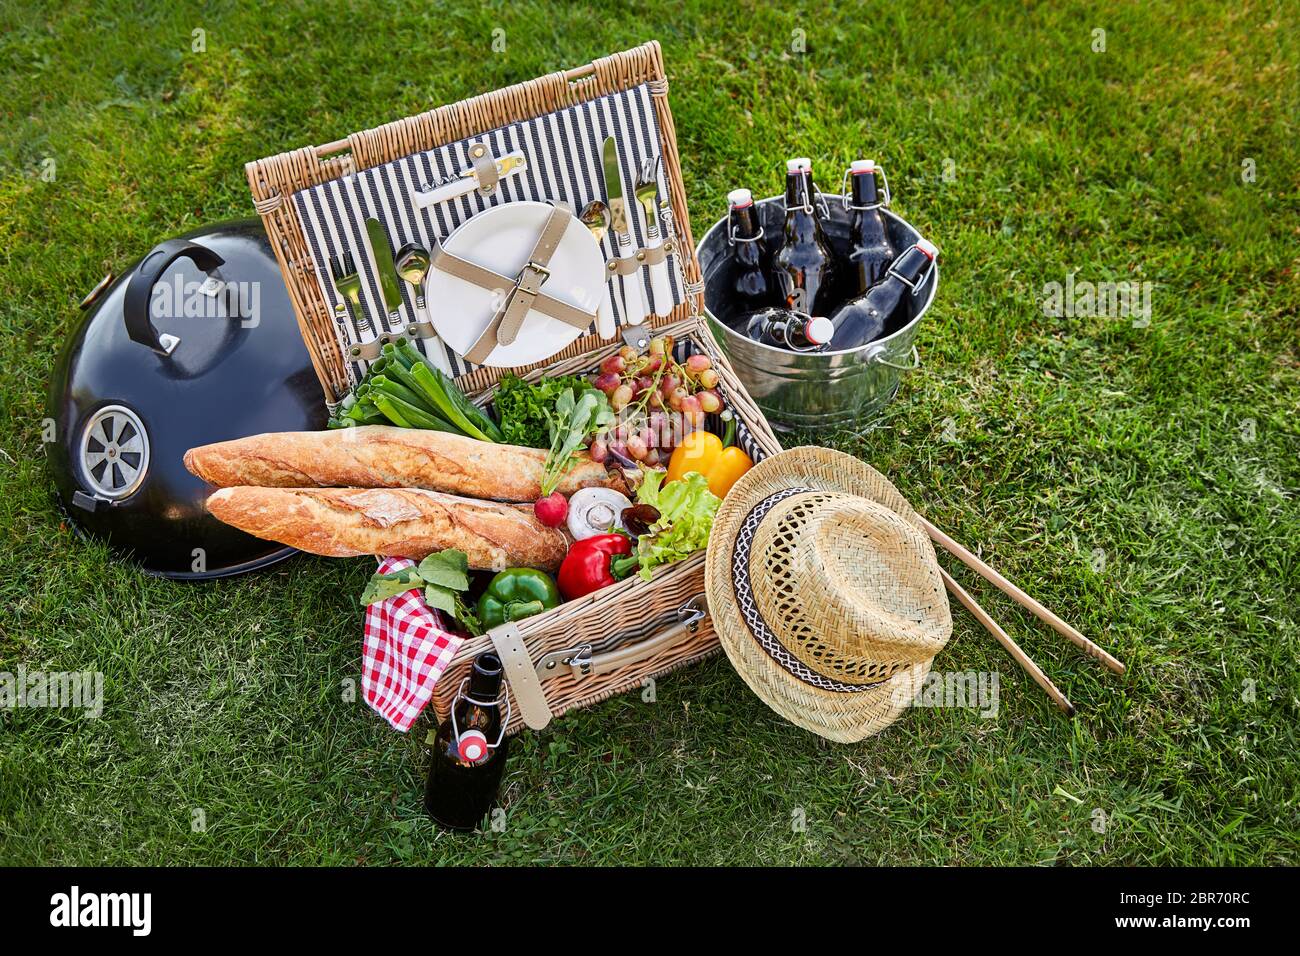 Vintage style wicker picnic hamper with an assortment of fresh vegetables for salads and crusty French baguettes alongside a silver cooler with bottle Stock Photo